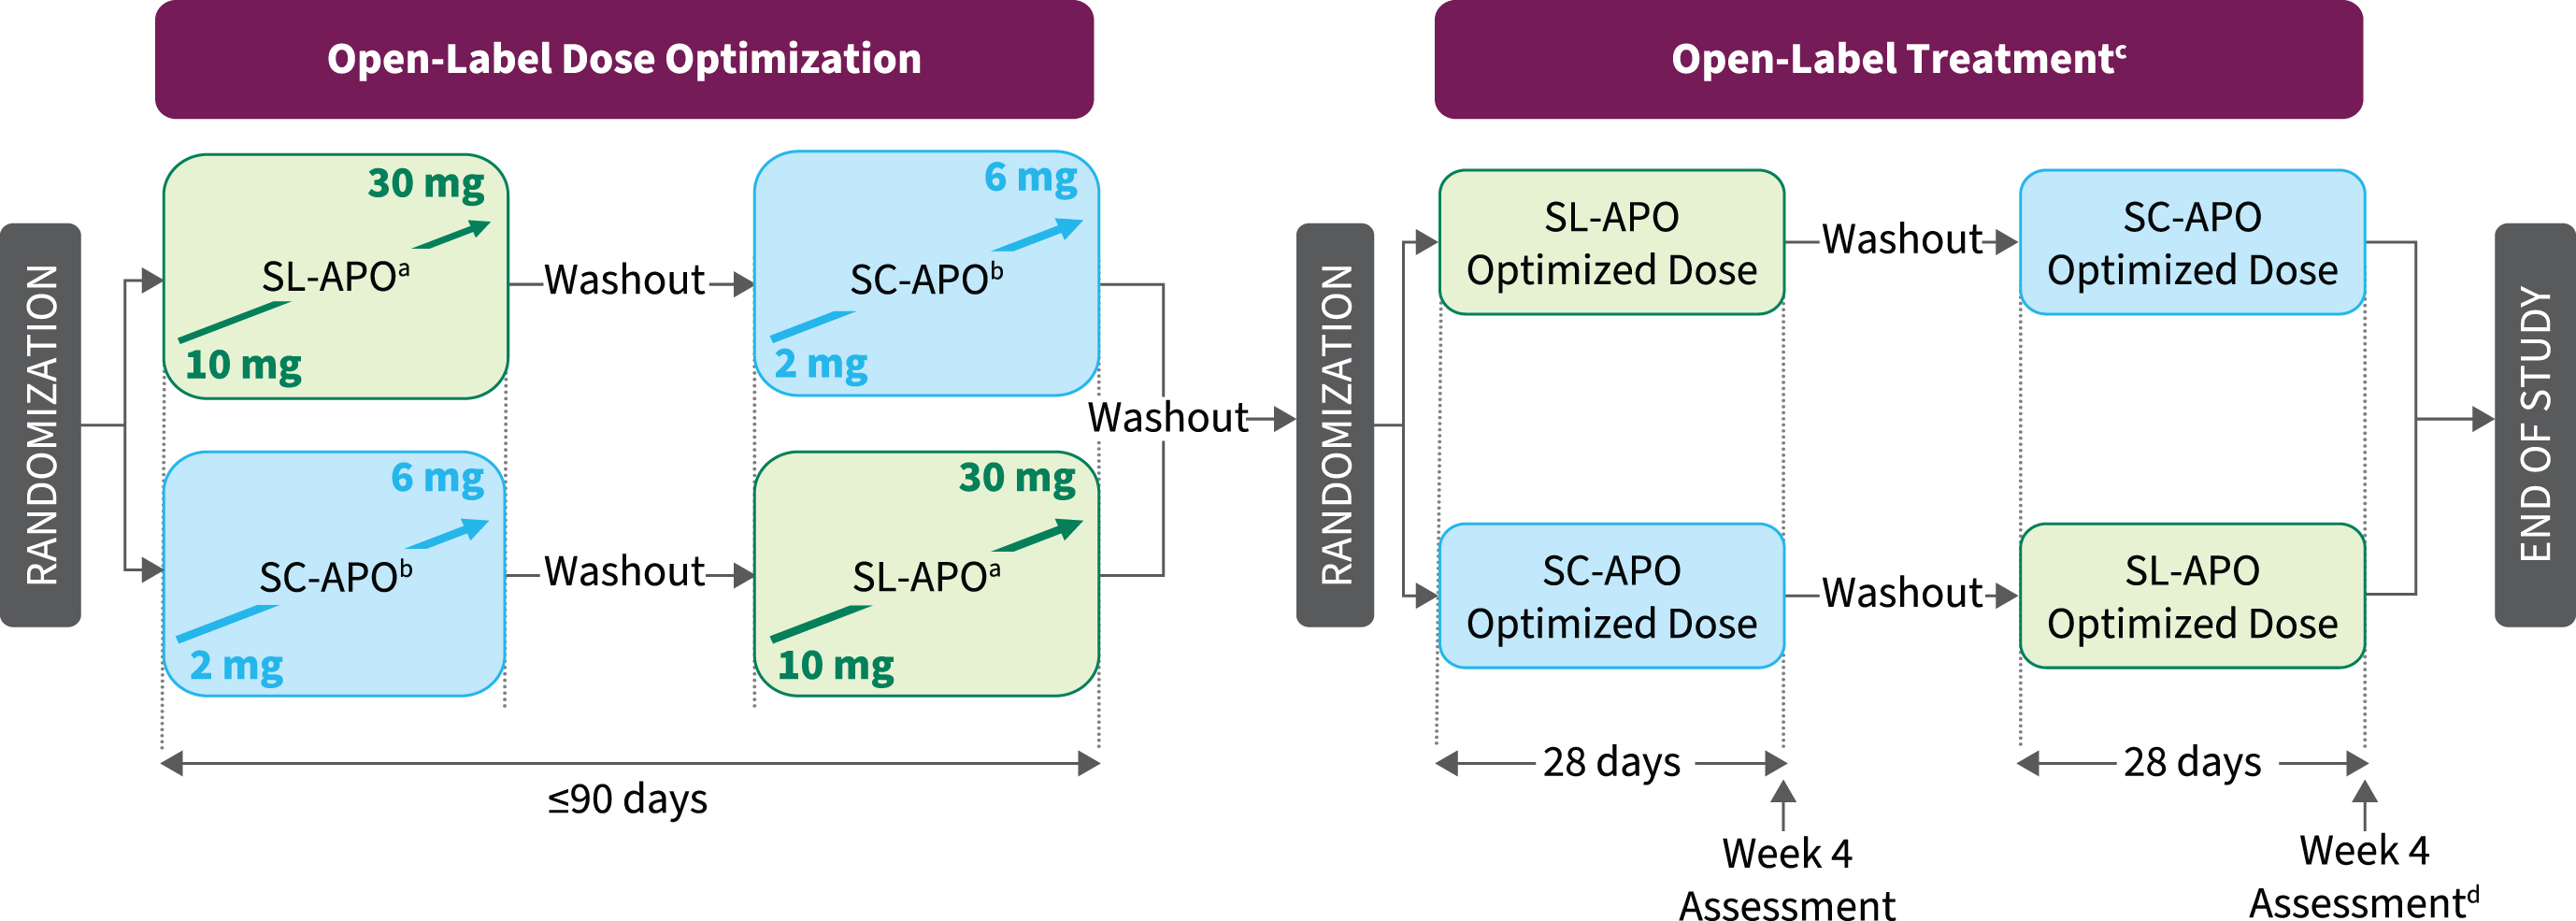 Study design. aPatients in a practically defined OFF received 10 mg of SL-APO in the clinic and if a FULL ON (defined as the period when medication provided benefit with regard to mobility, stiffness, and slowness and the patient having adequate motor function to perform normal daily activities) was not achieved within 30 min, up-titration (5-mg dose increases; 30-mg dose maximum) during subsequent practically defined OFF episodes could continue at home without in-person observation. If a FULL ON was achieved at home, patients returned to the clinic for a dose-confirmation visit, during which the investigator could adjust the dose, if necessary. bPatients in a practically defined OFF received 2 mg of SC-APO in the clinic and if a FULL ON was not achieved within 30 min, up-titration (1-mg dose increases; 6-mg dose maximum) during subsequent OFF episodes continued in the clinic. cPatients could administer study drug for up to 5 OFF episodes per day, with doses separated by ≥2 h. dTreatment Preference Questionnaire was performed at week 4 after both regimens had been completed. SC-APO, subcutaneous apomorphine; SL-APO, apomorphine sublingual film.